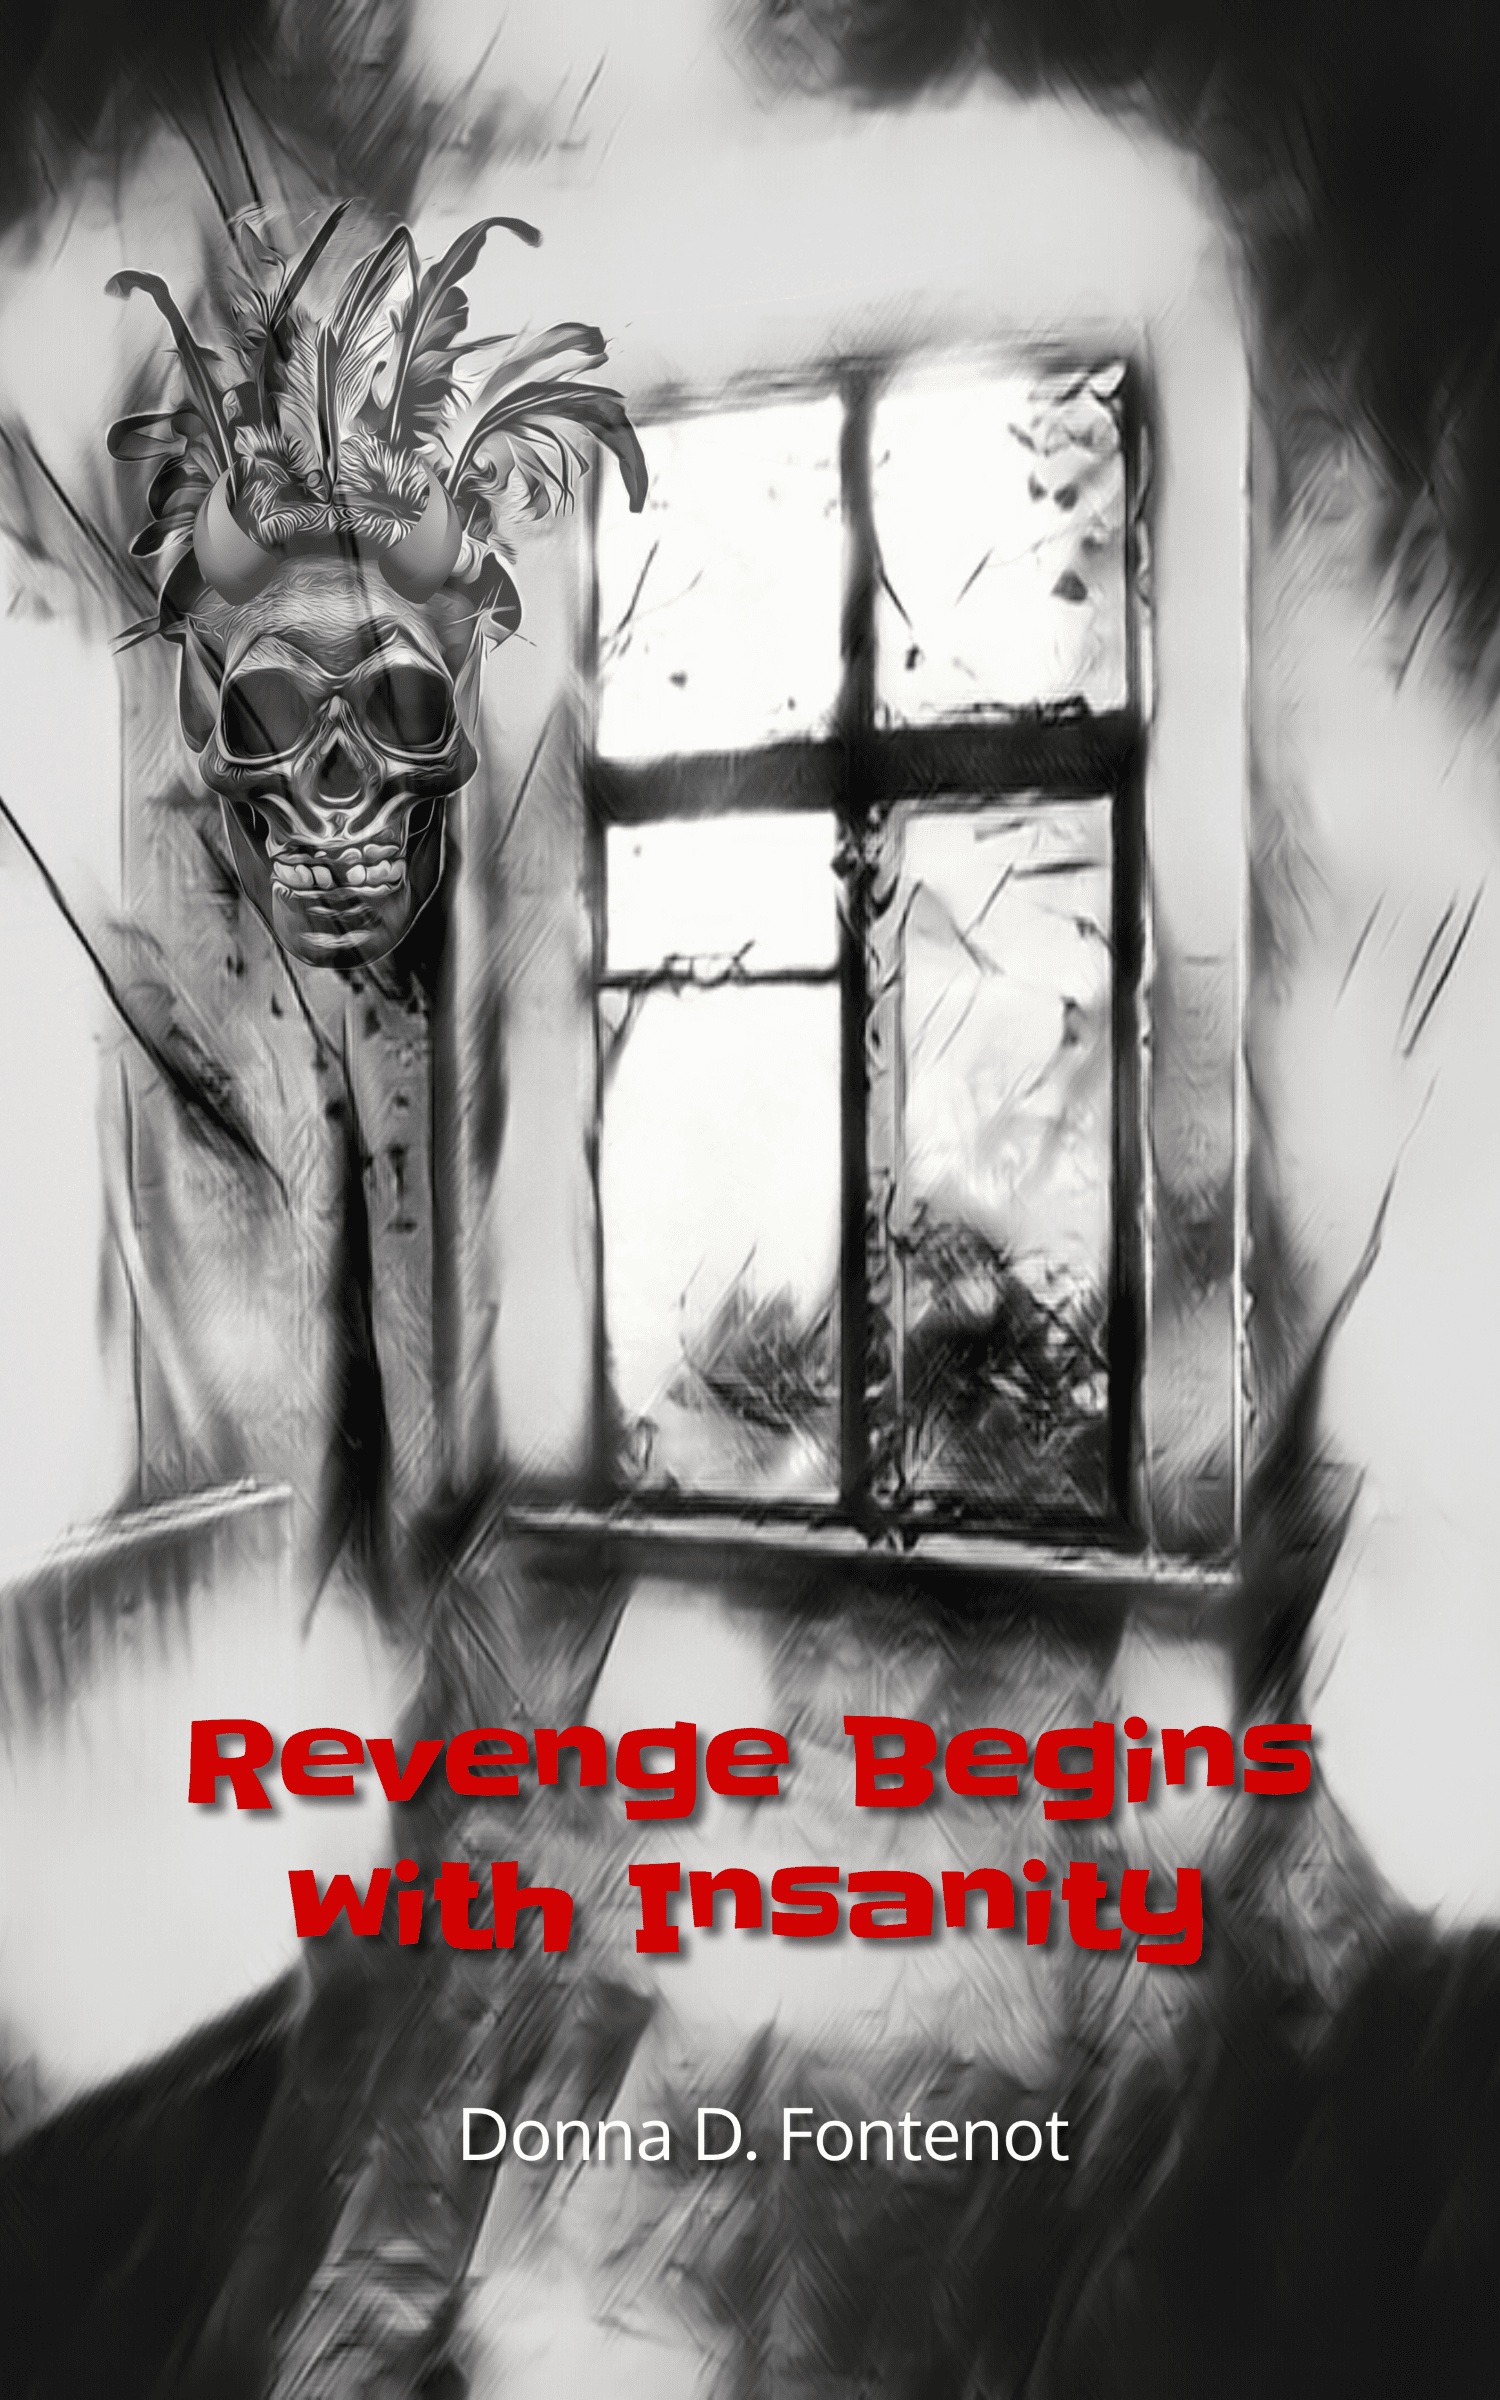 My New Novel, Revenge Begins With Insanity, Now Available